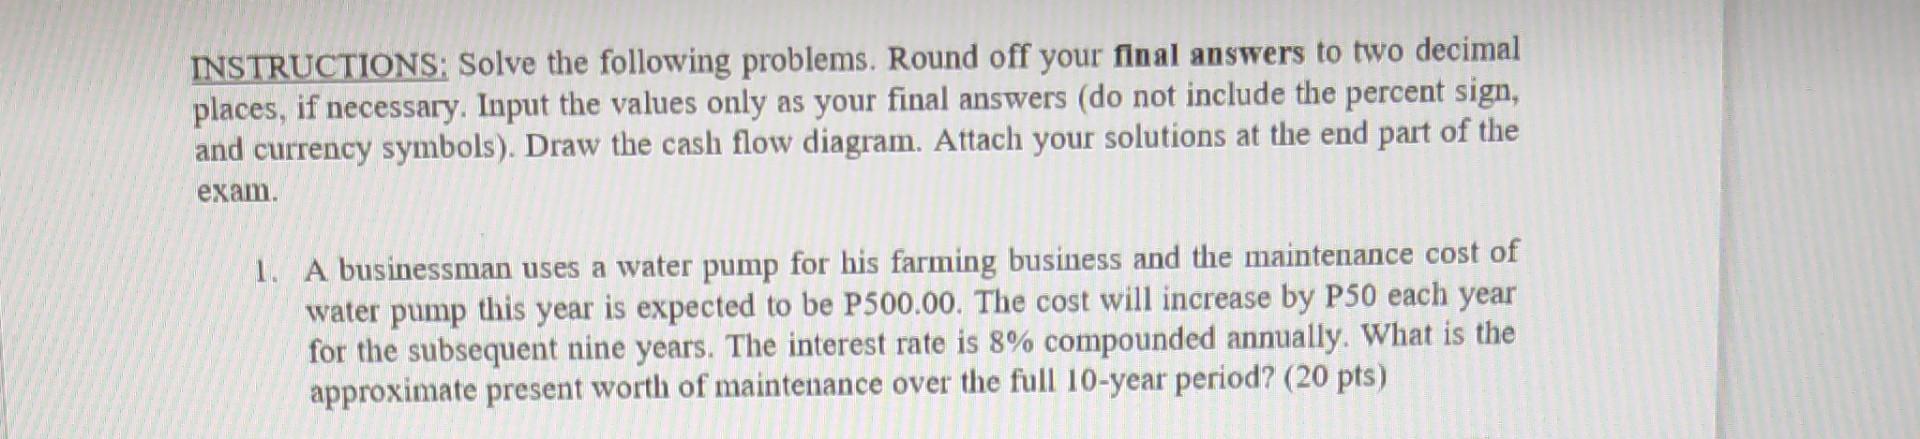 INSTRUCTIONS: Solve the following problems. Round off your final answers to two decimal places, if necessary. Input the value